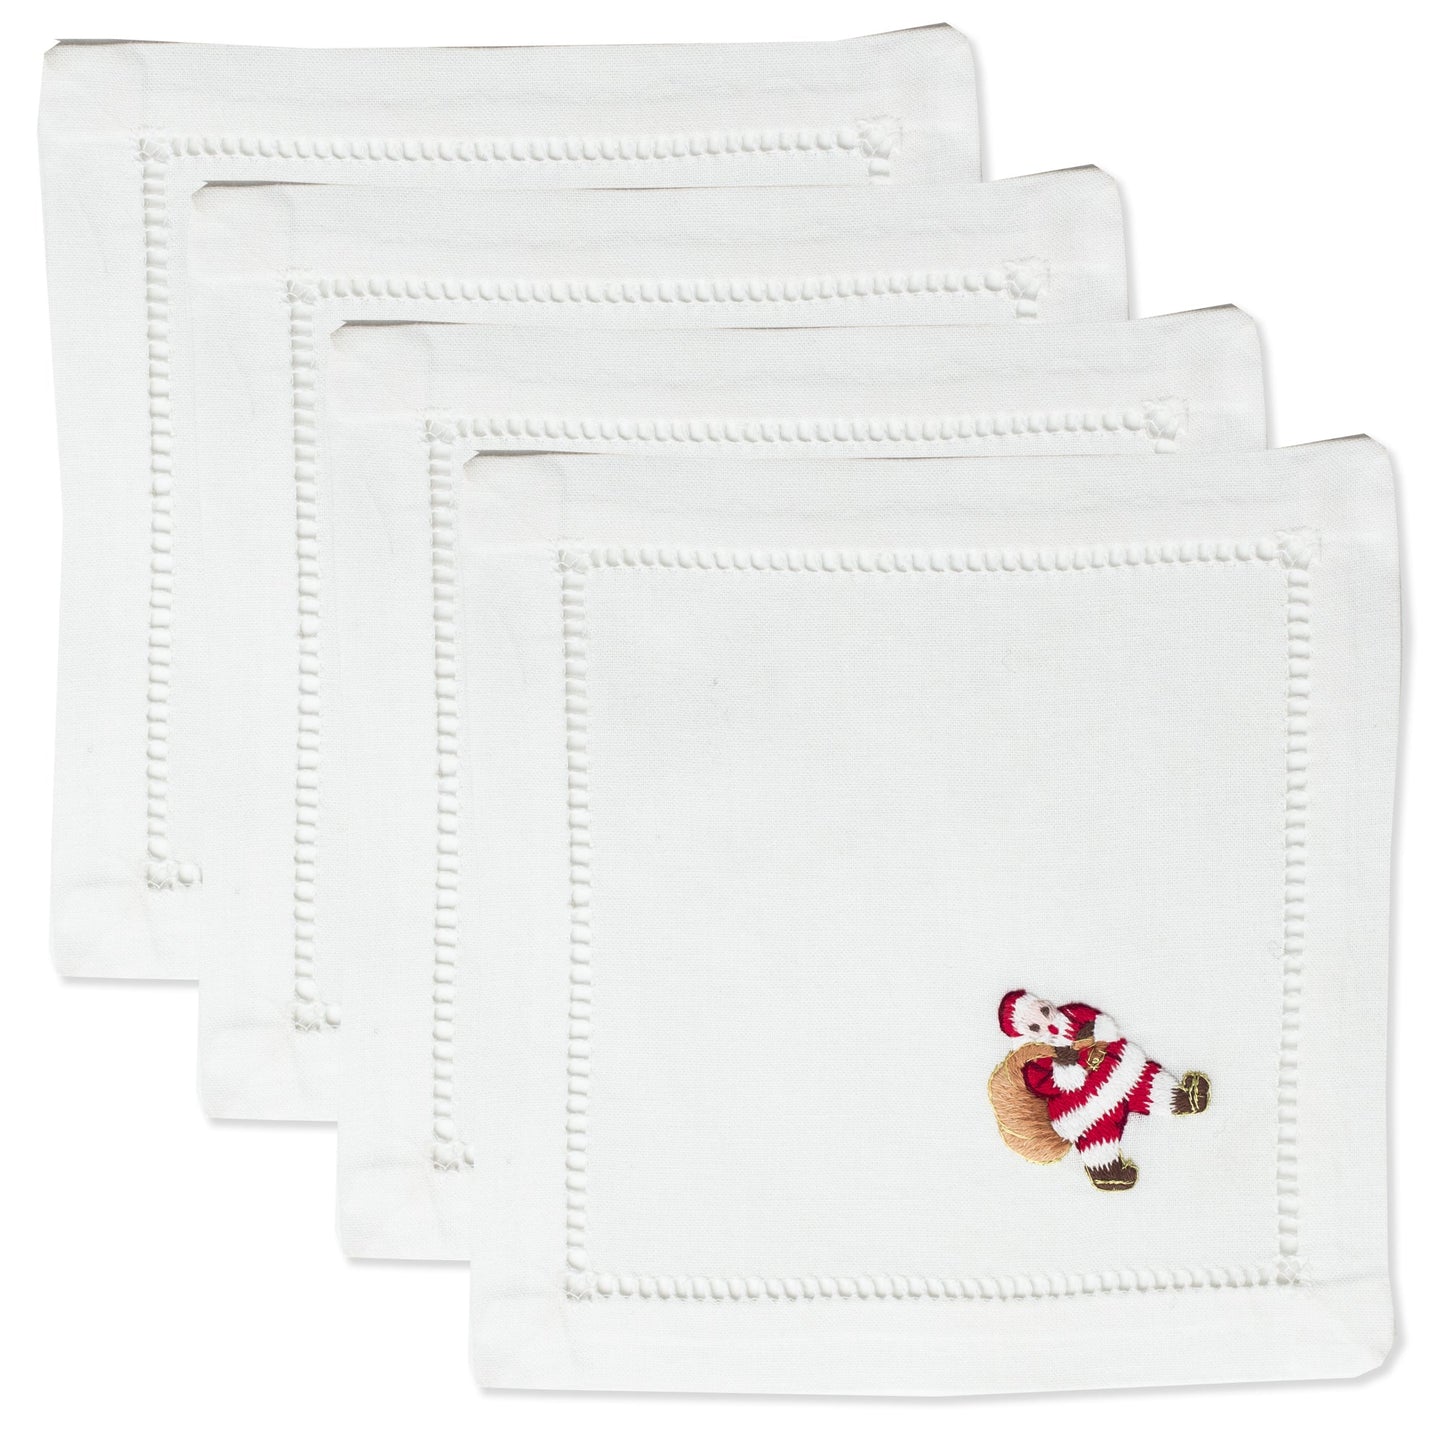 4 white cocktail napkins with a hemstitch border. Santa is embroidered on the bottom right corner of each